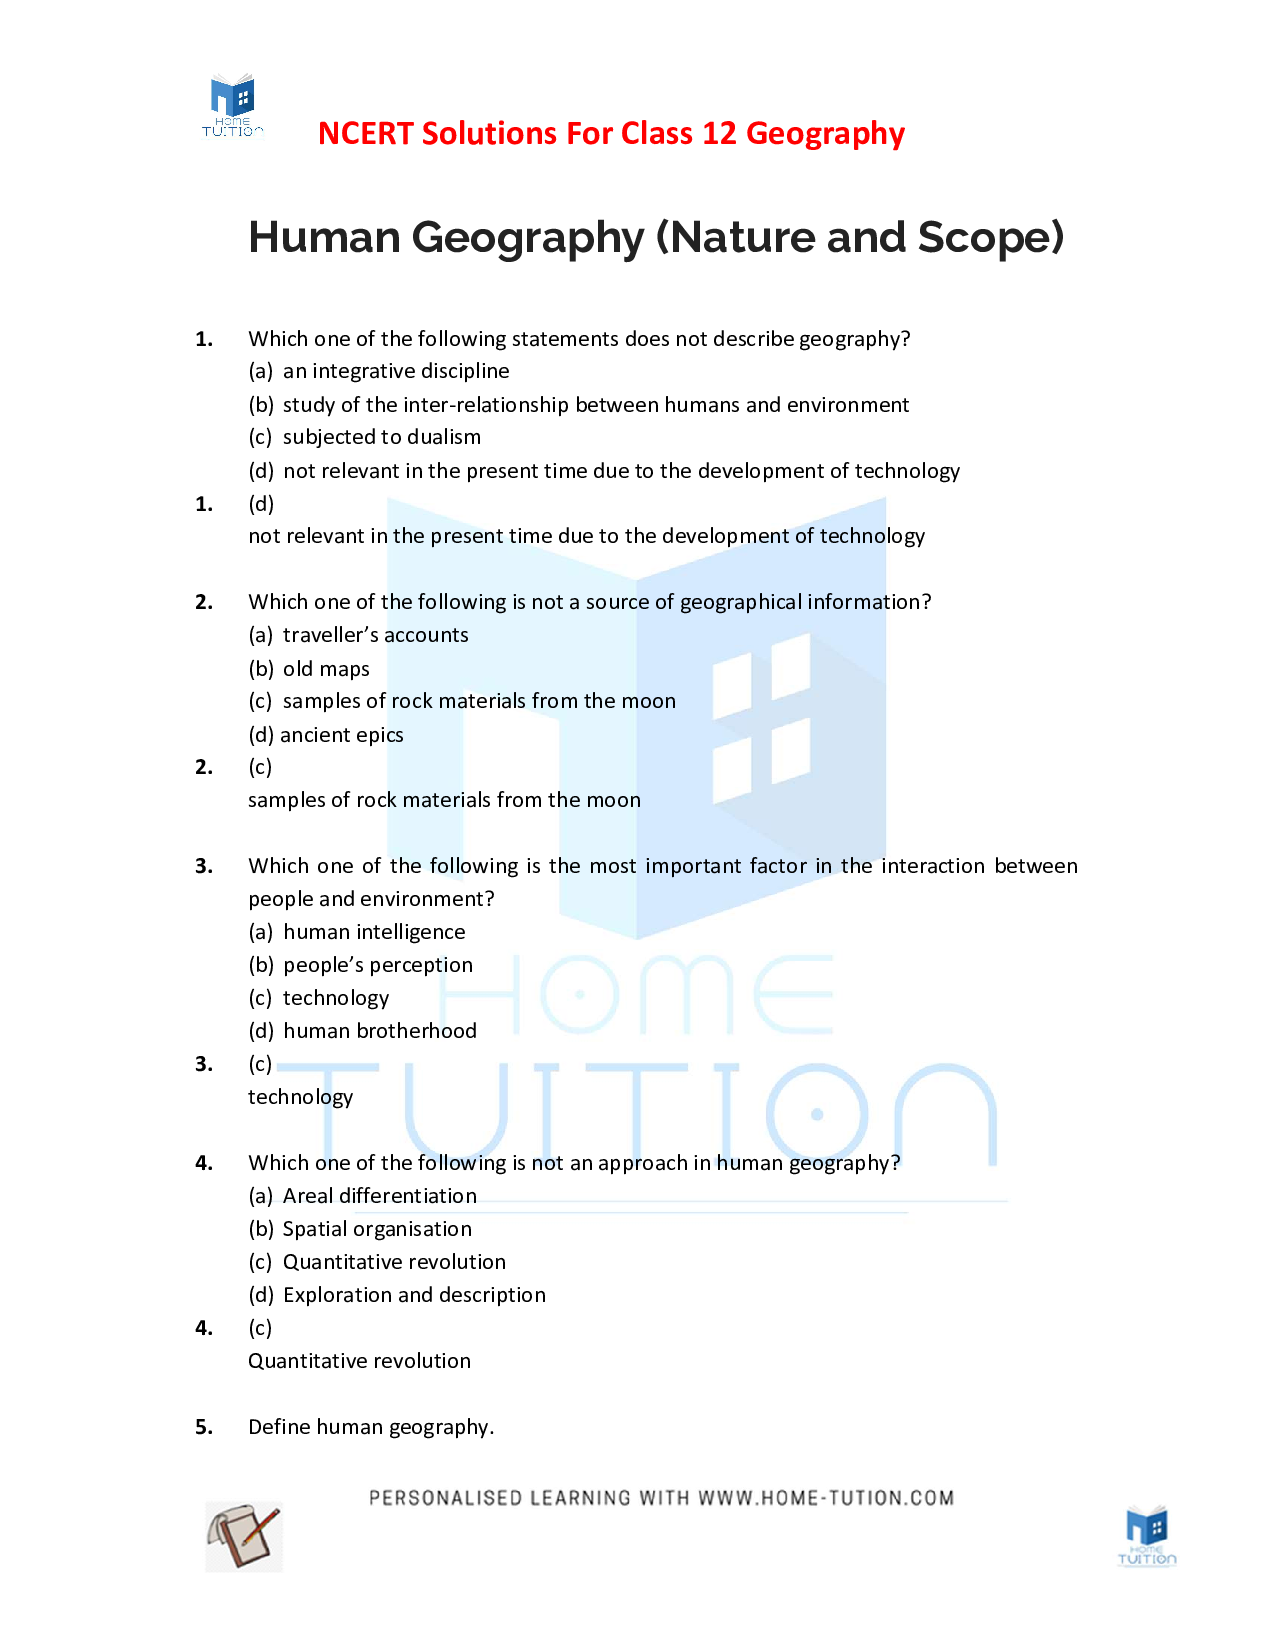 Chapter 1 Human Geography (Nature and Scope)